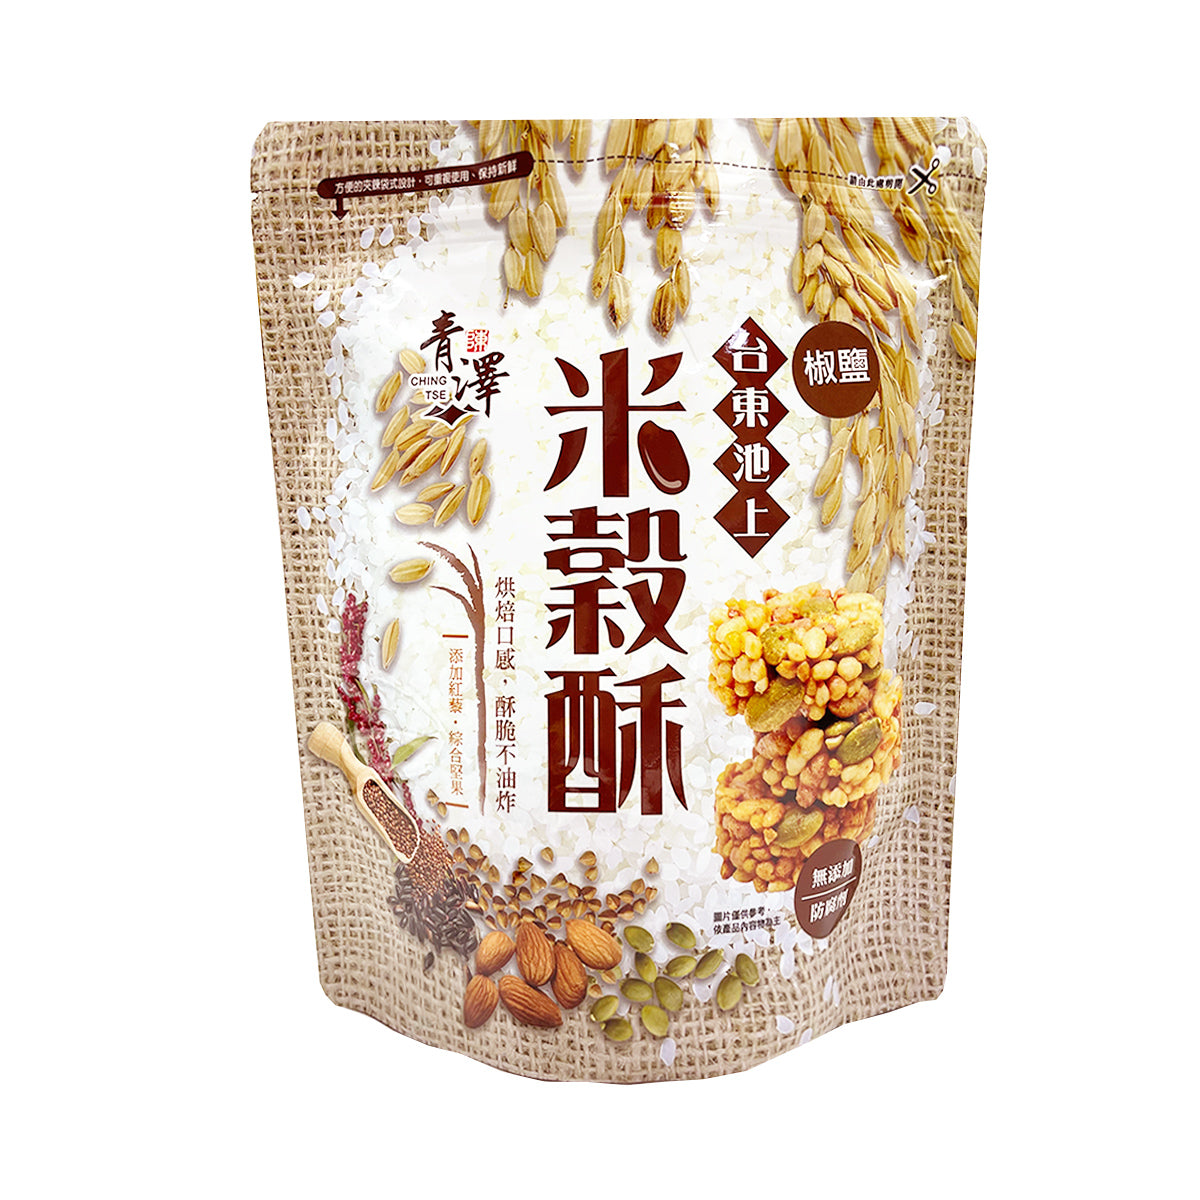 【CHING TSE】Rice Cookie - Salt and Pepper 160g